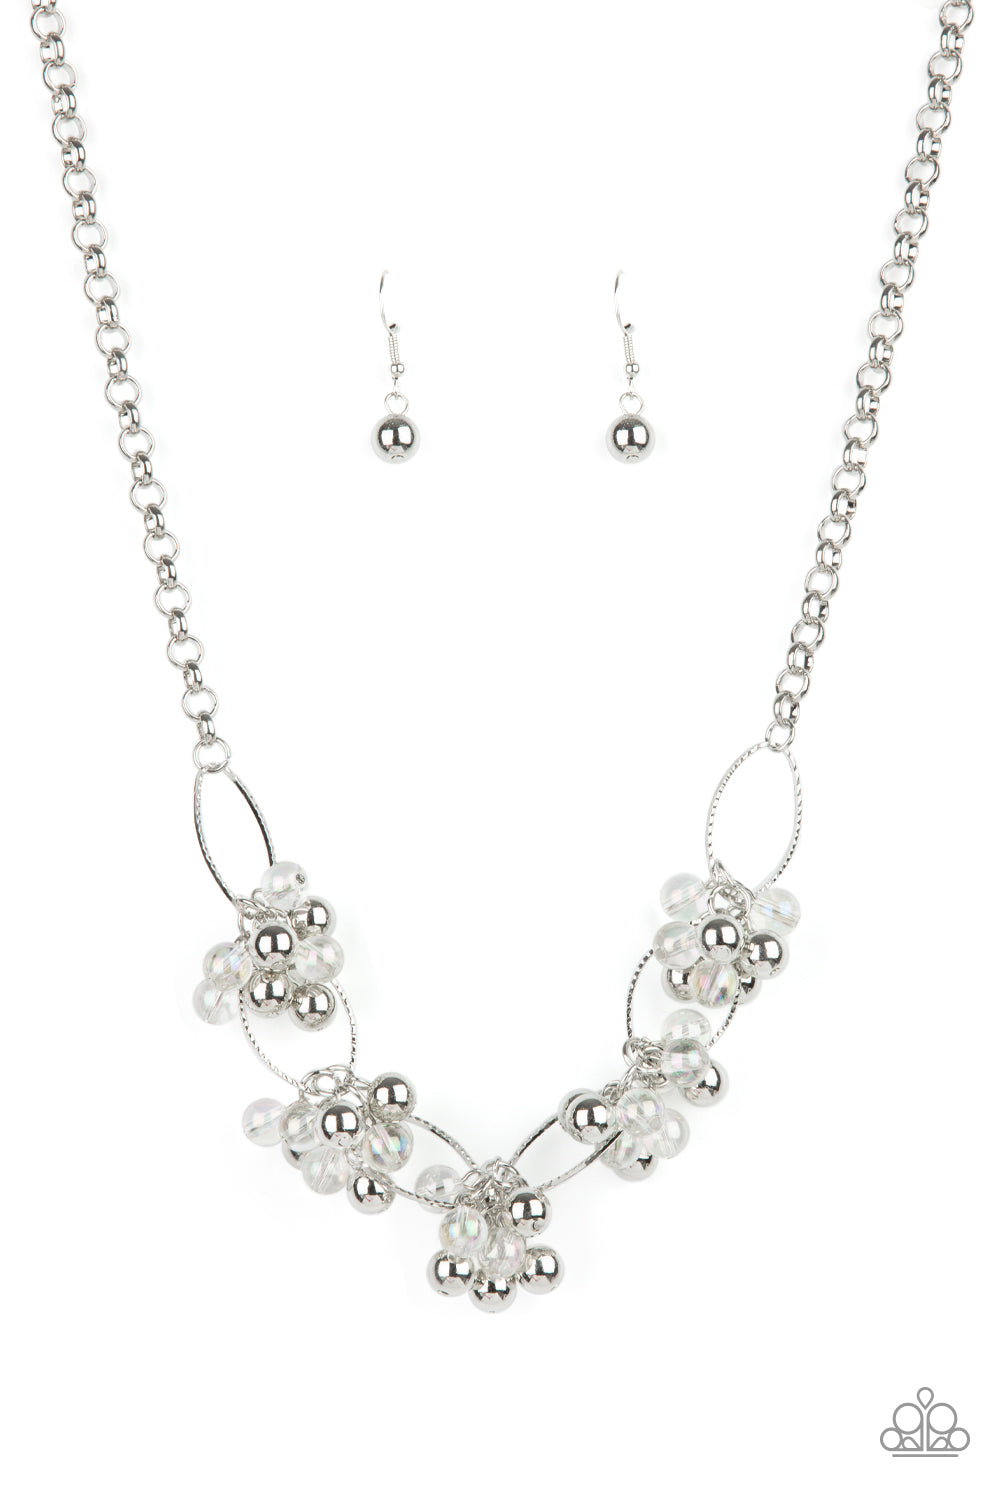 Paparazzi Effervescent Ensemble Cosmic Countess - White Necklace - July 2021 Life Of The Party Exclusive - A Finishing Touch Jewelry